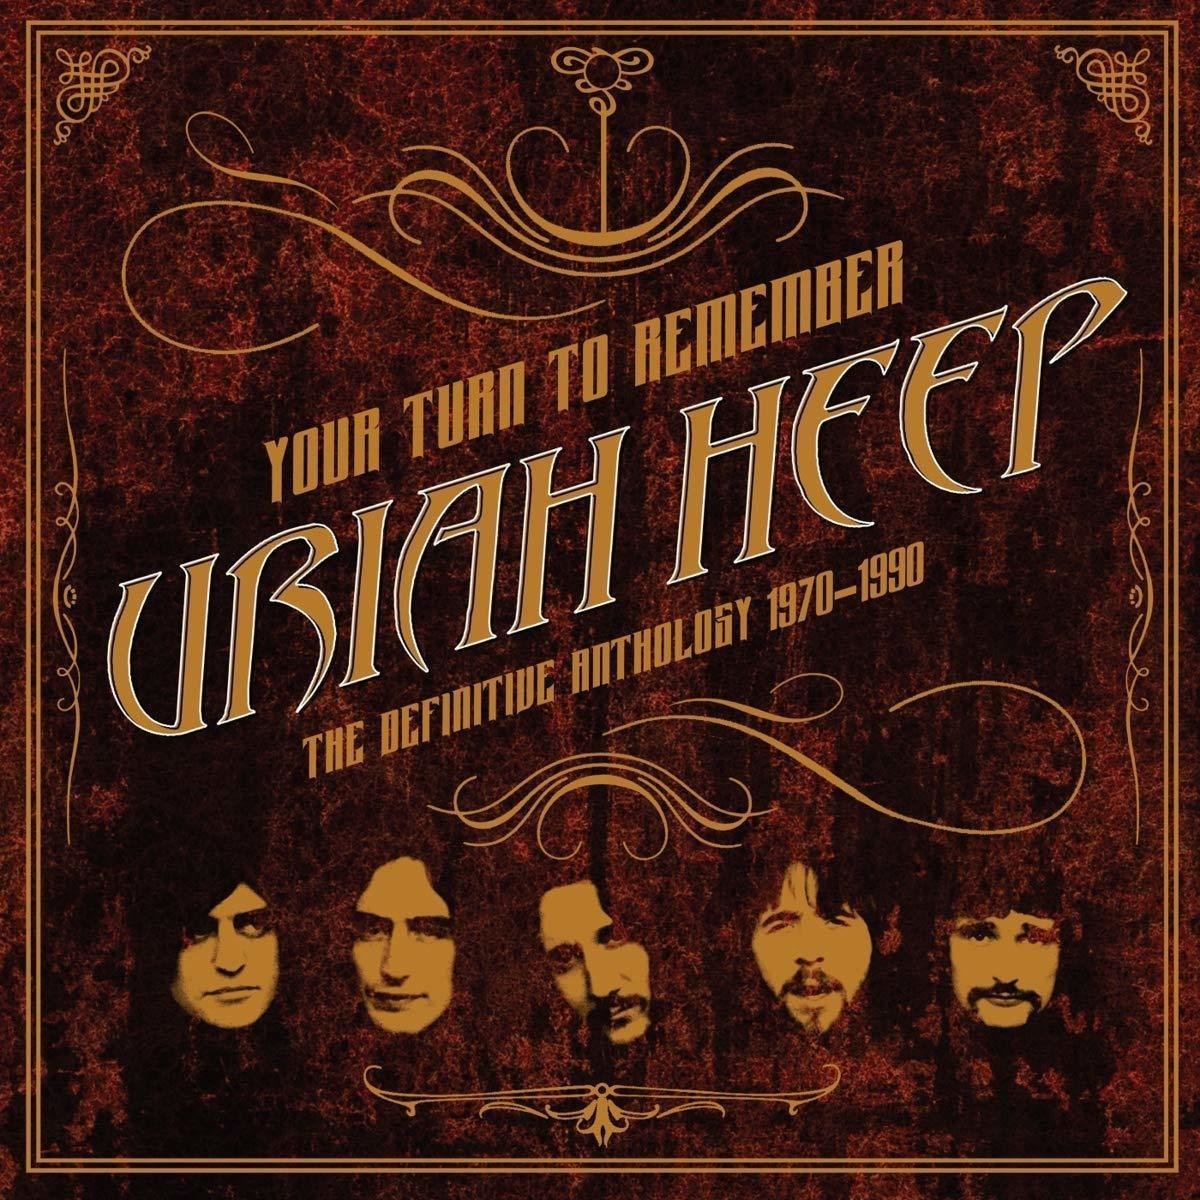 Schallplatte Uriah Heep - Your Turn To Remember: The Definitive Anthology 1970-1990 (LP)